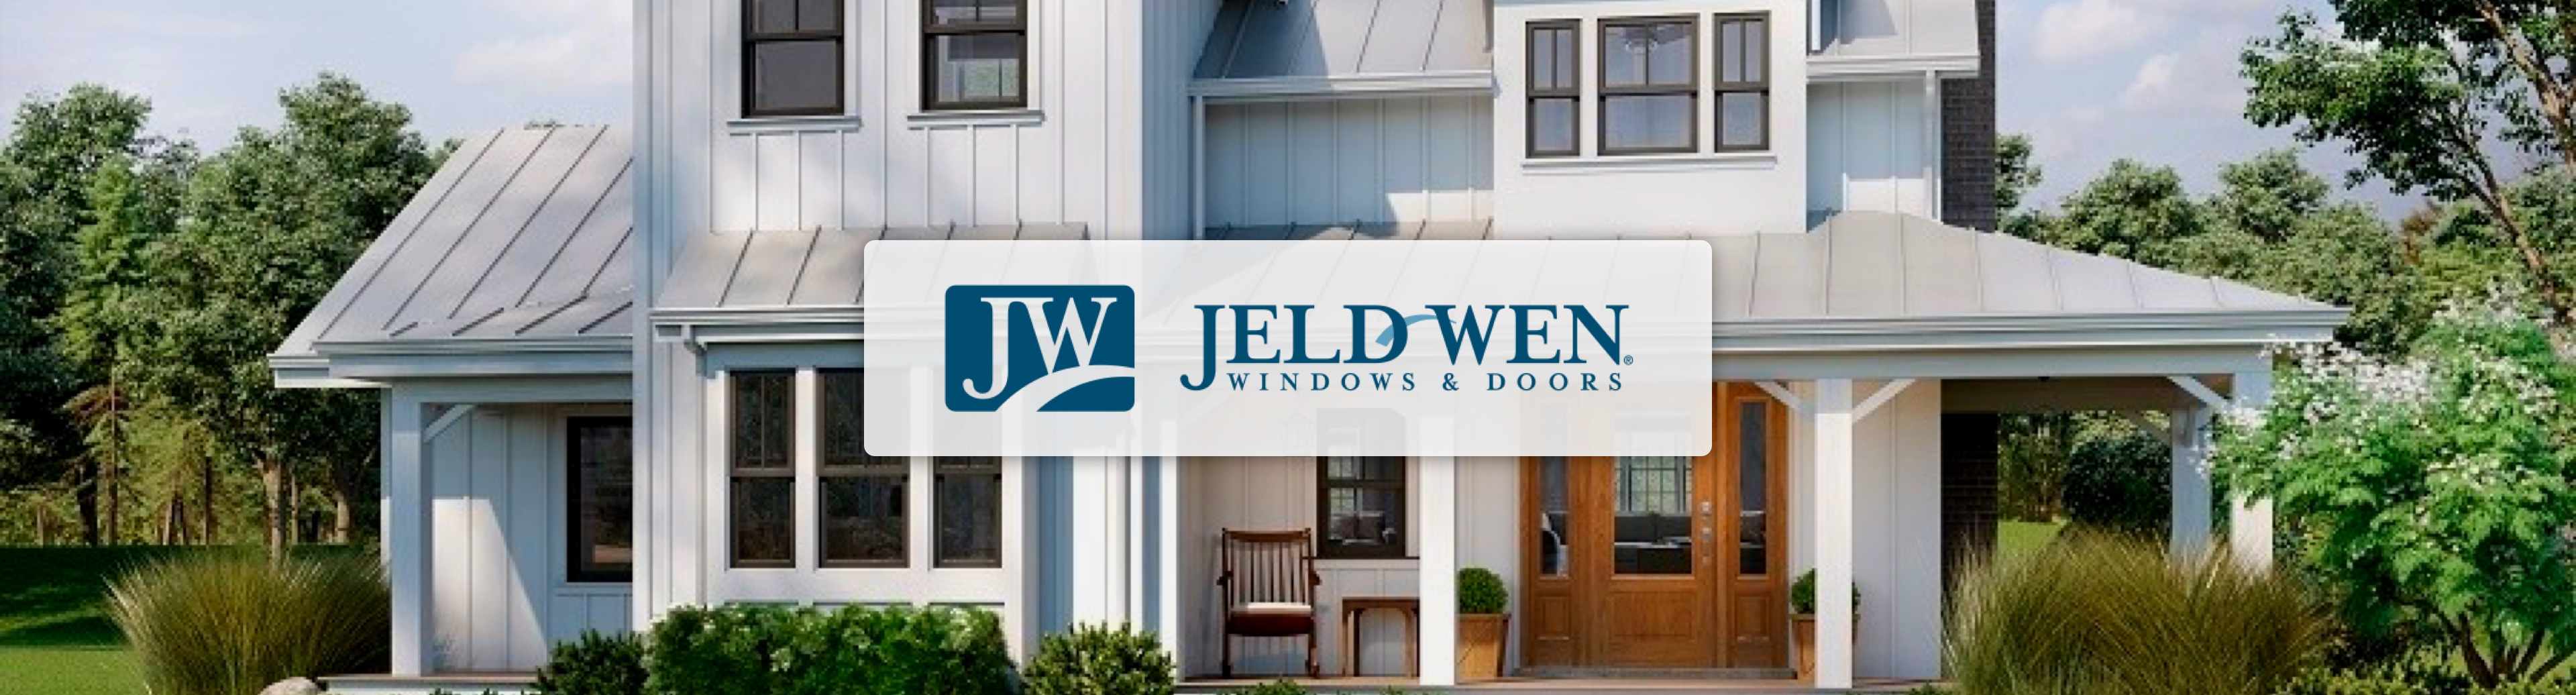 Jeld-wen logo with house in background